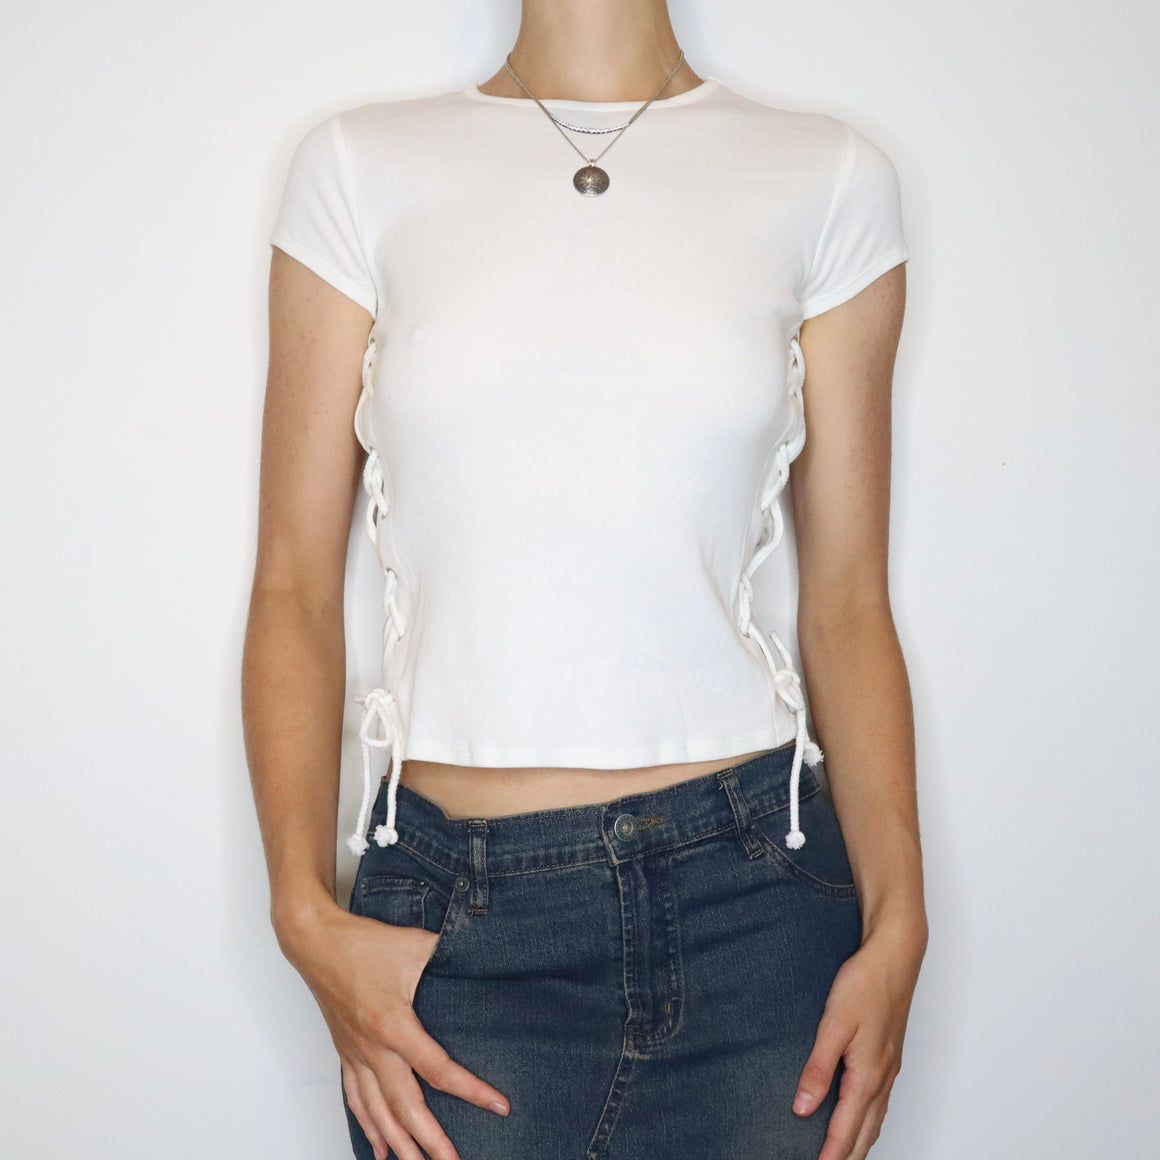 White Lace Up Baby Tee (S-M) 